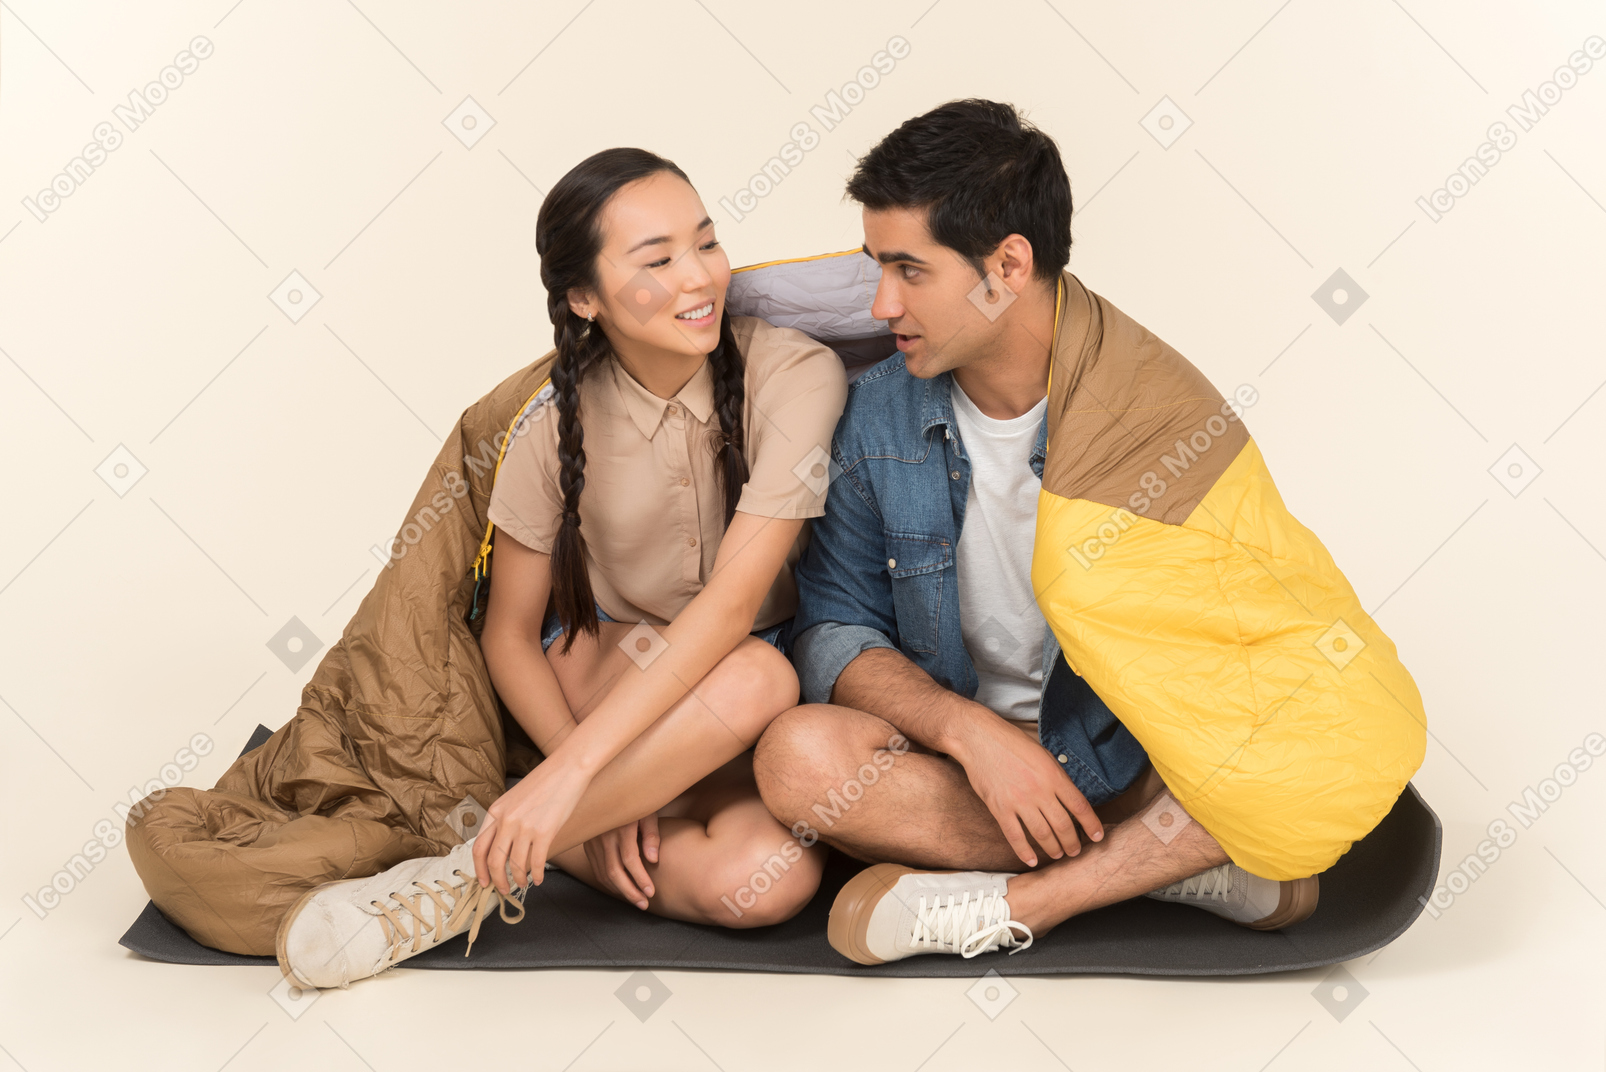 Young woman wrapped in sleeping bag and man sitting on karimat